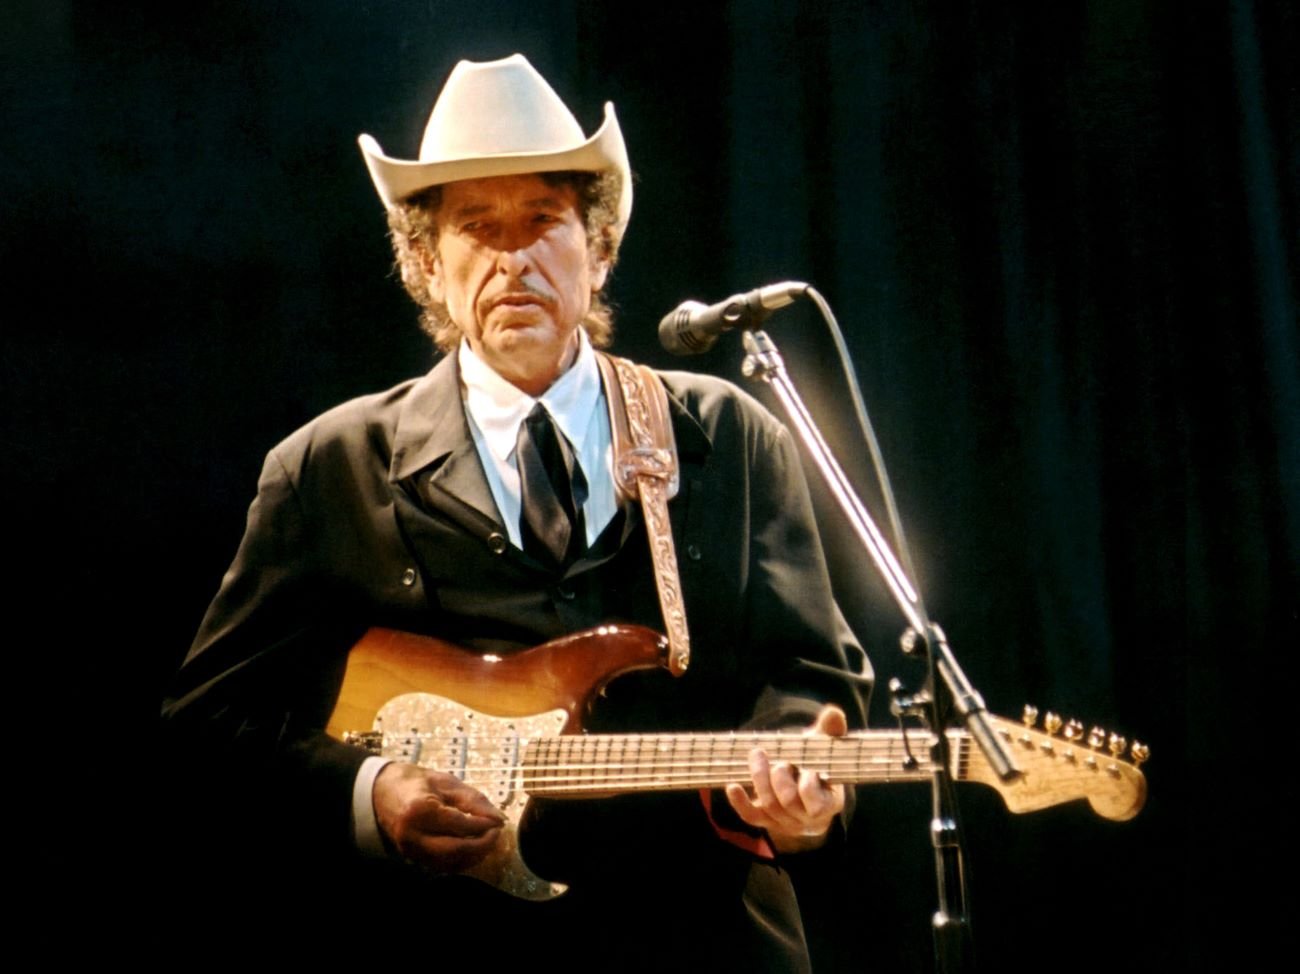 Bob Dylan wearing a cowboy hat and holding a guitar.